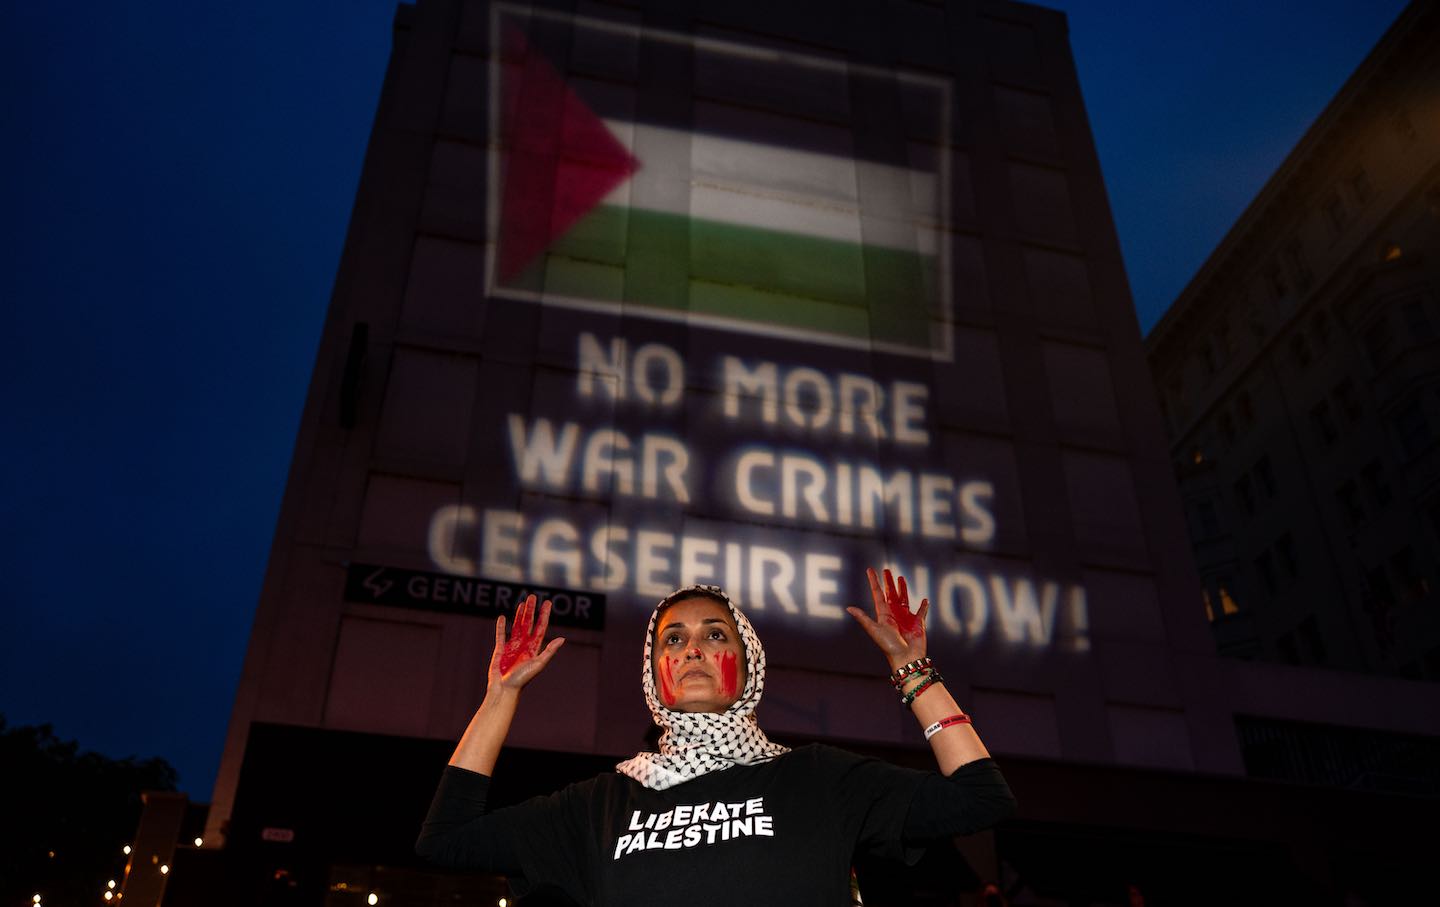 It’s Time to Stop Ignoring the Sexual Violence Happening in Gaza